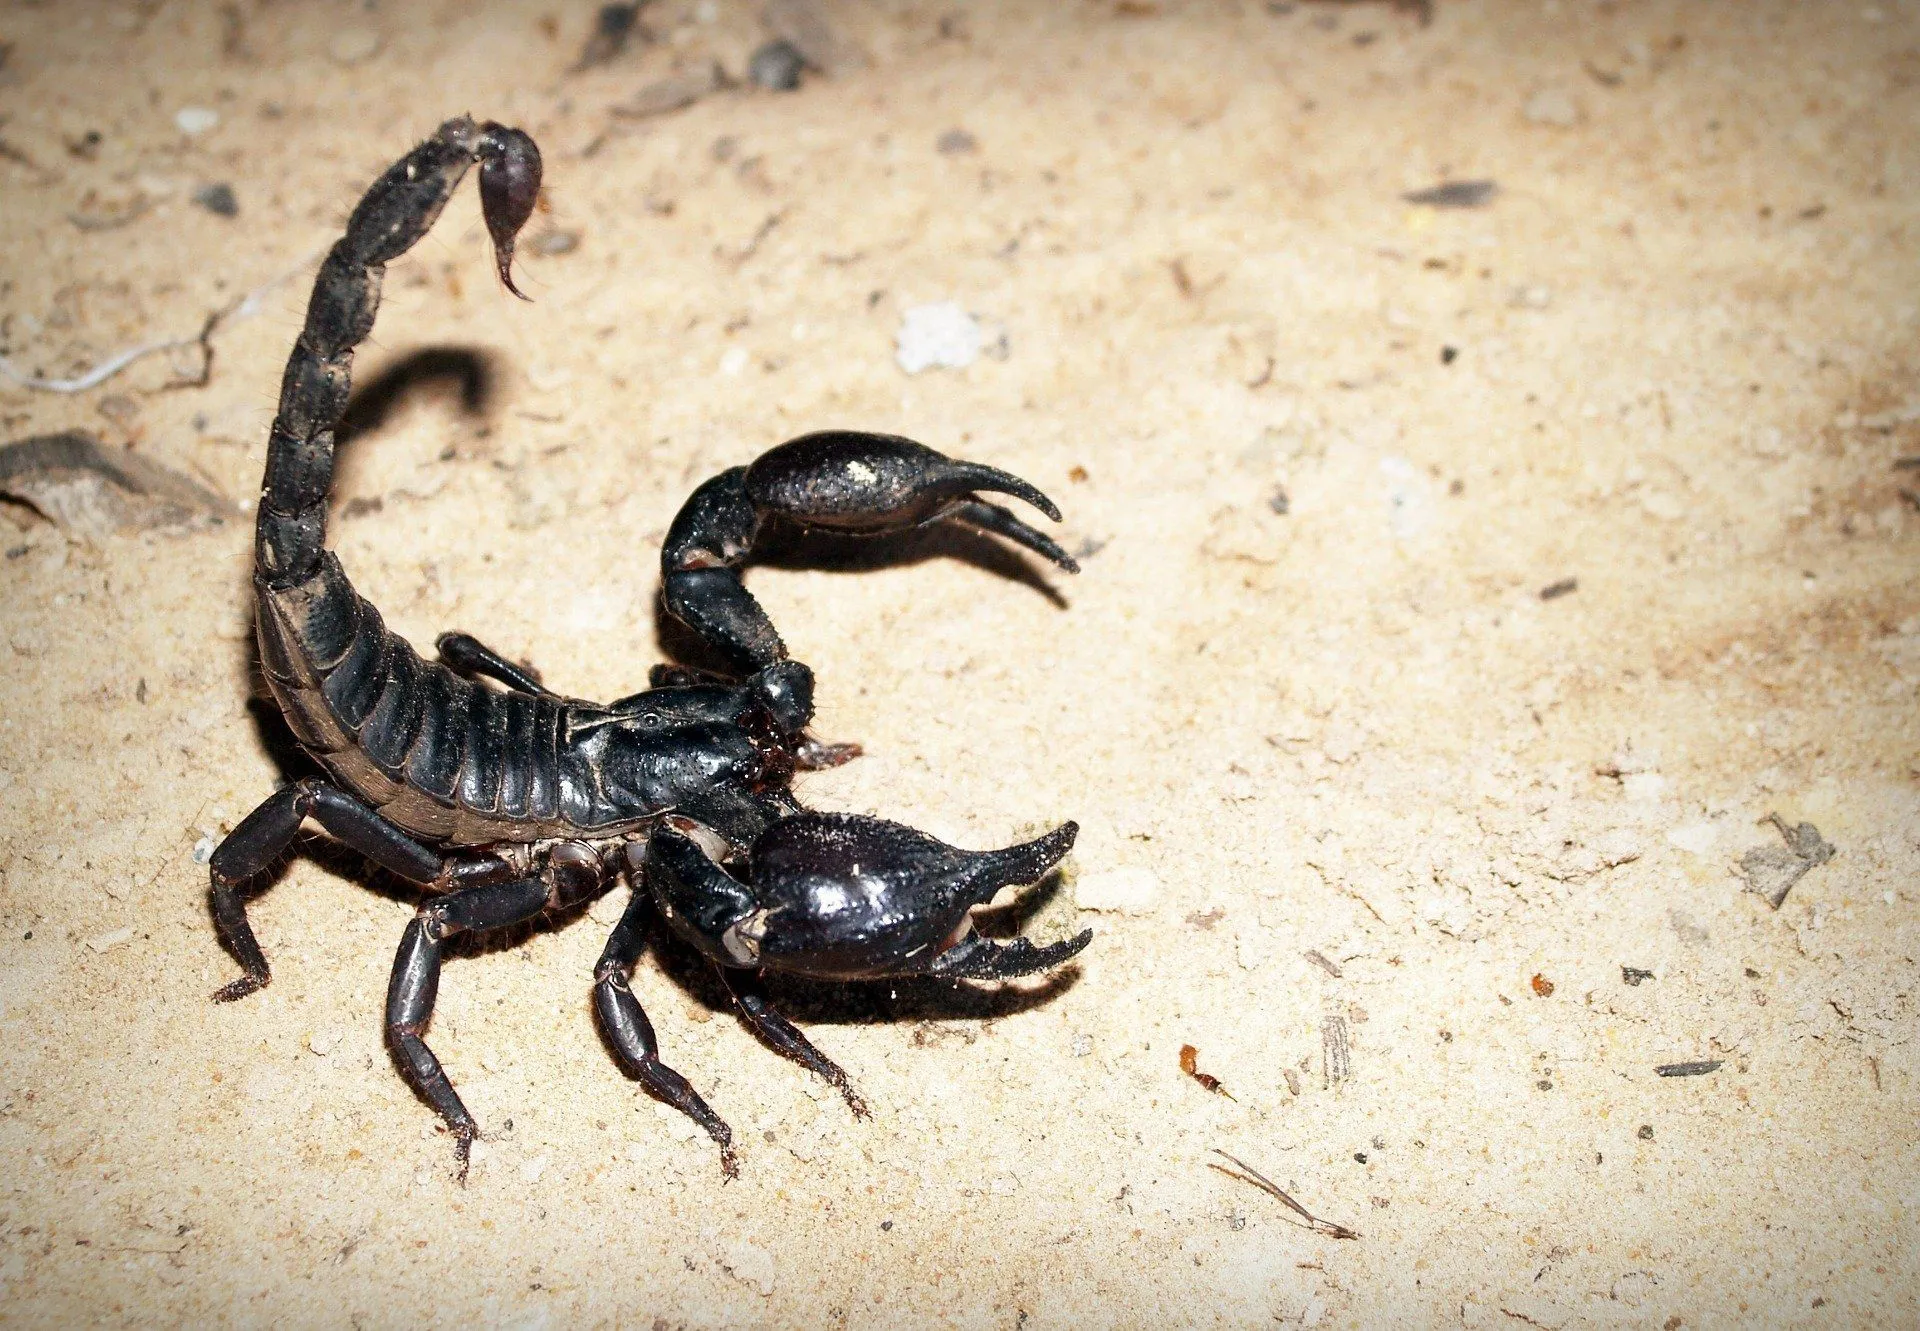 Female scorpions lay eggs that are fertilized and hatch inside the female body.